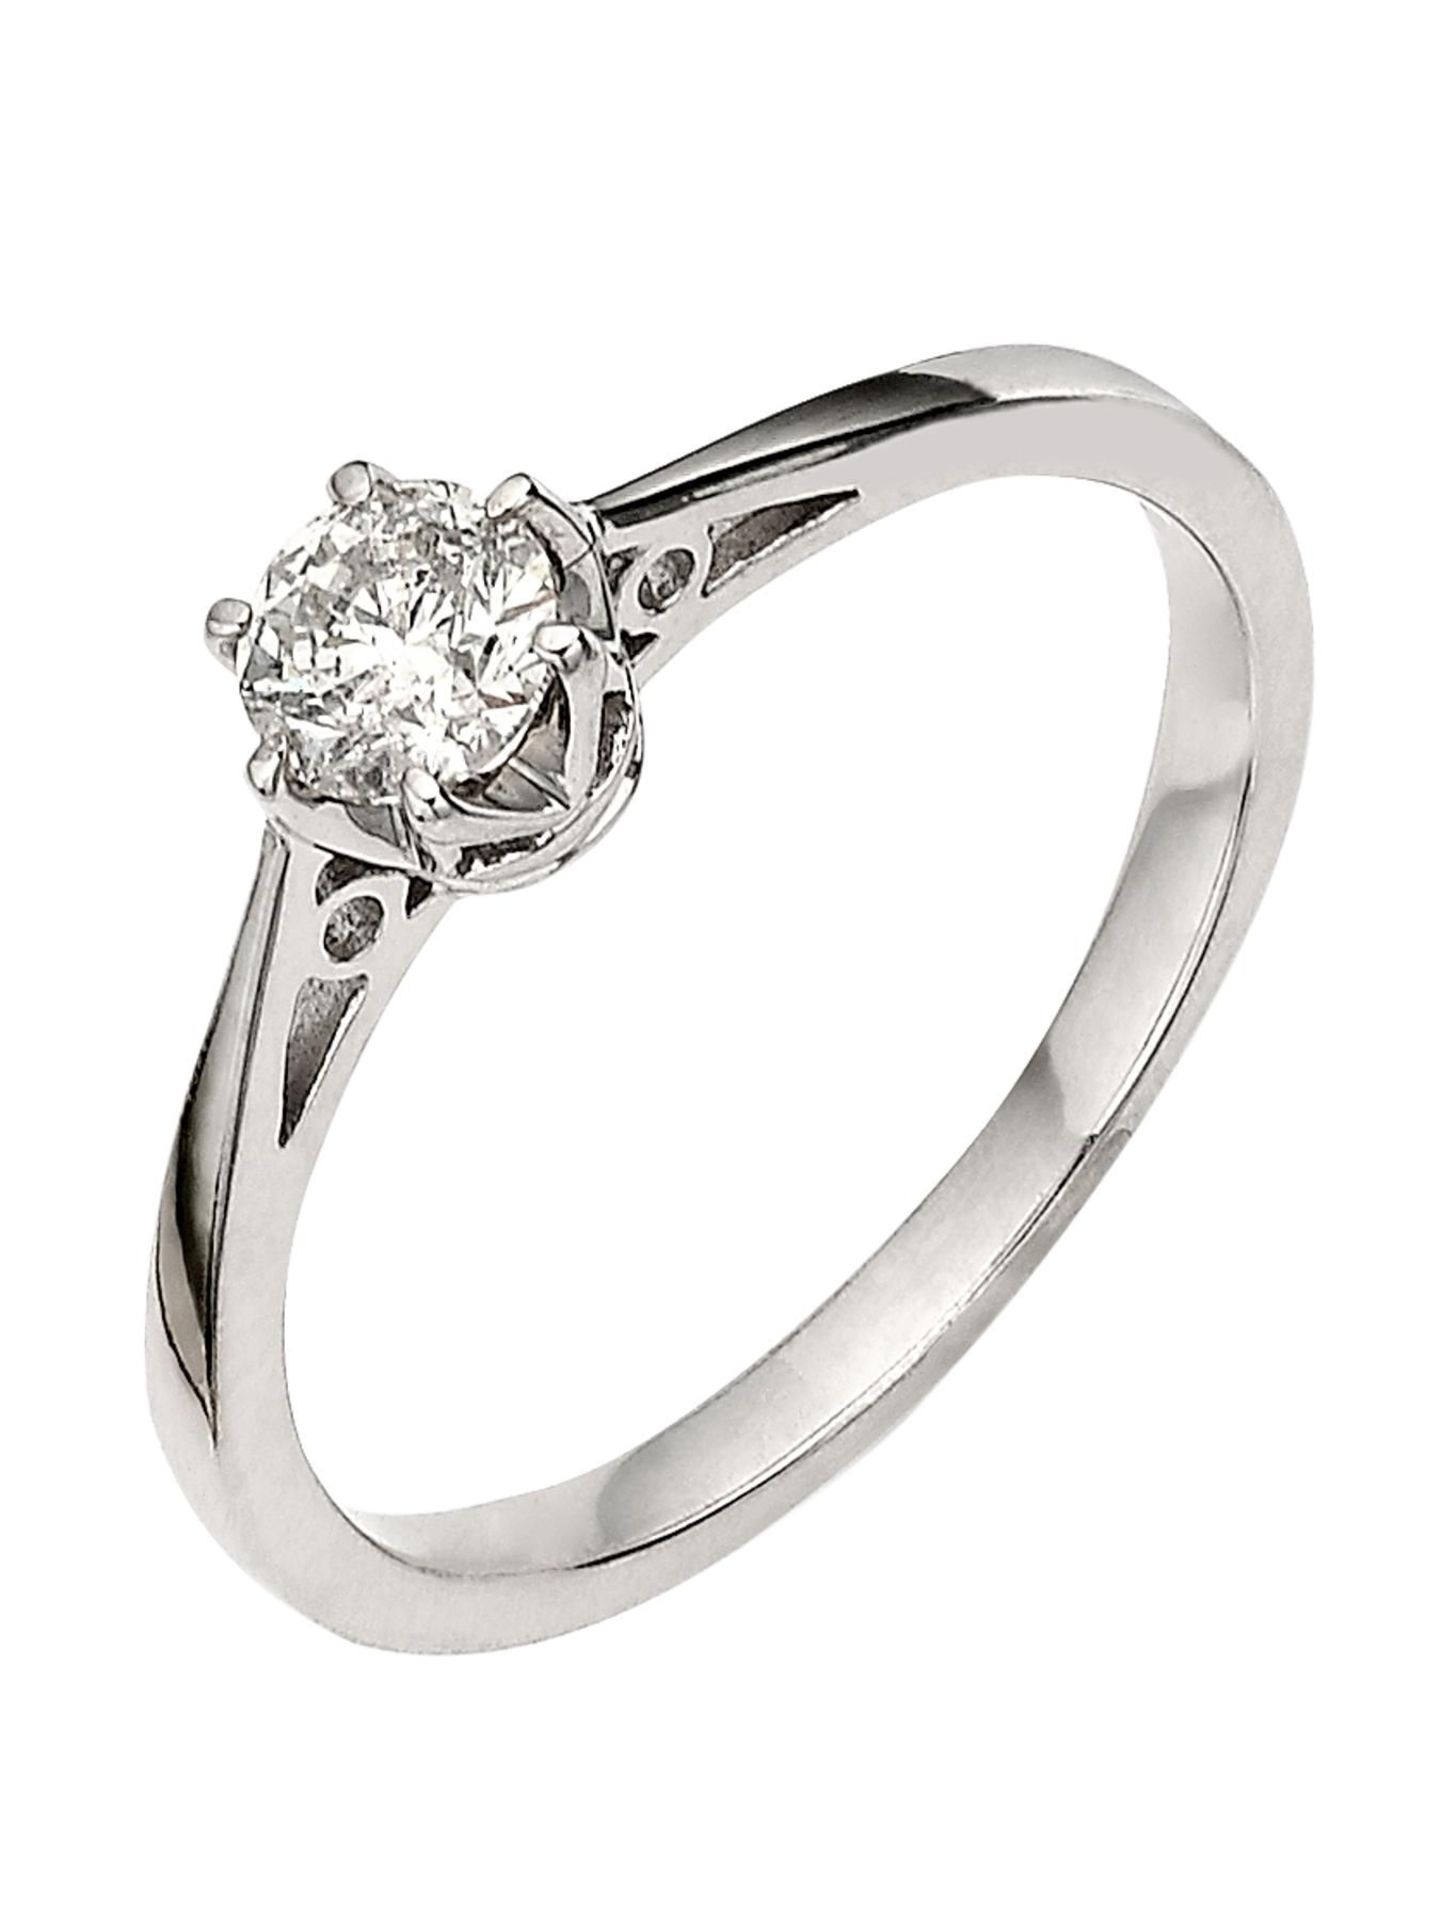 Diamond Solitaire Engagement 9ct White Gold Ring RRP £635 Size M